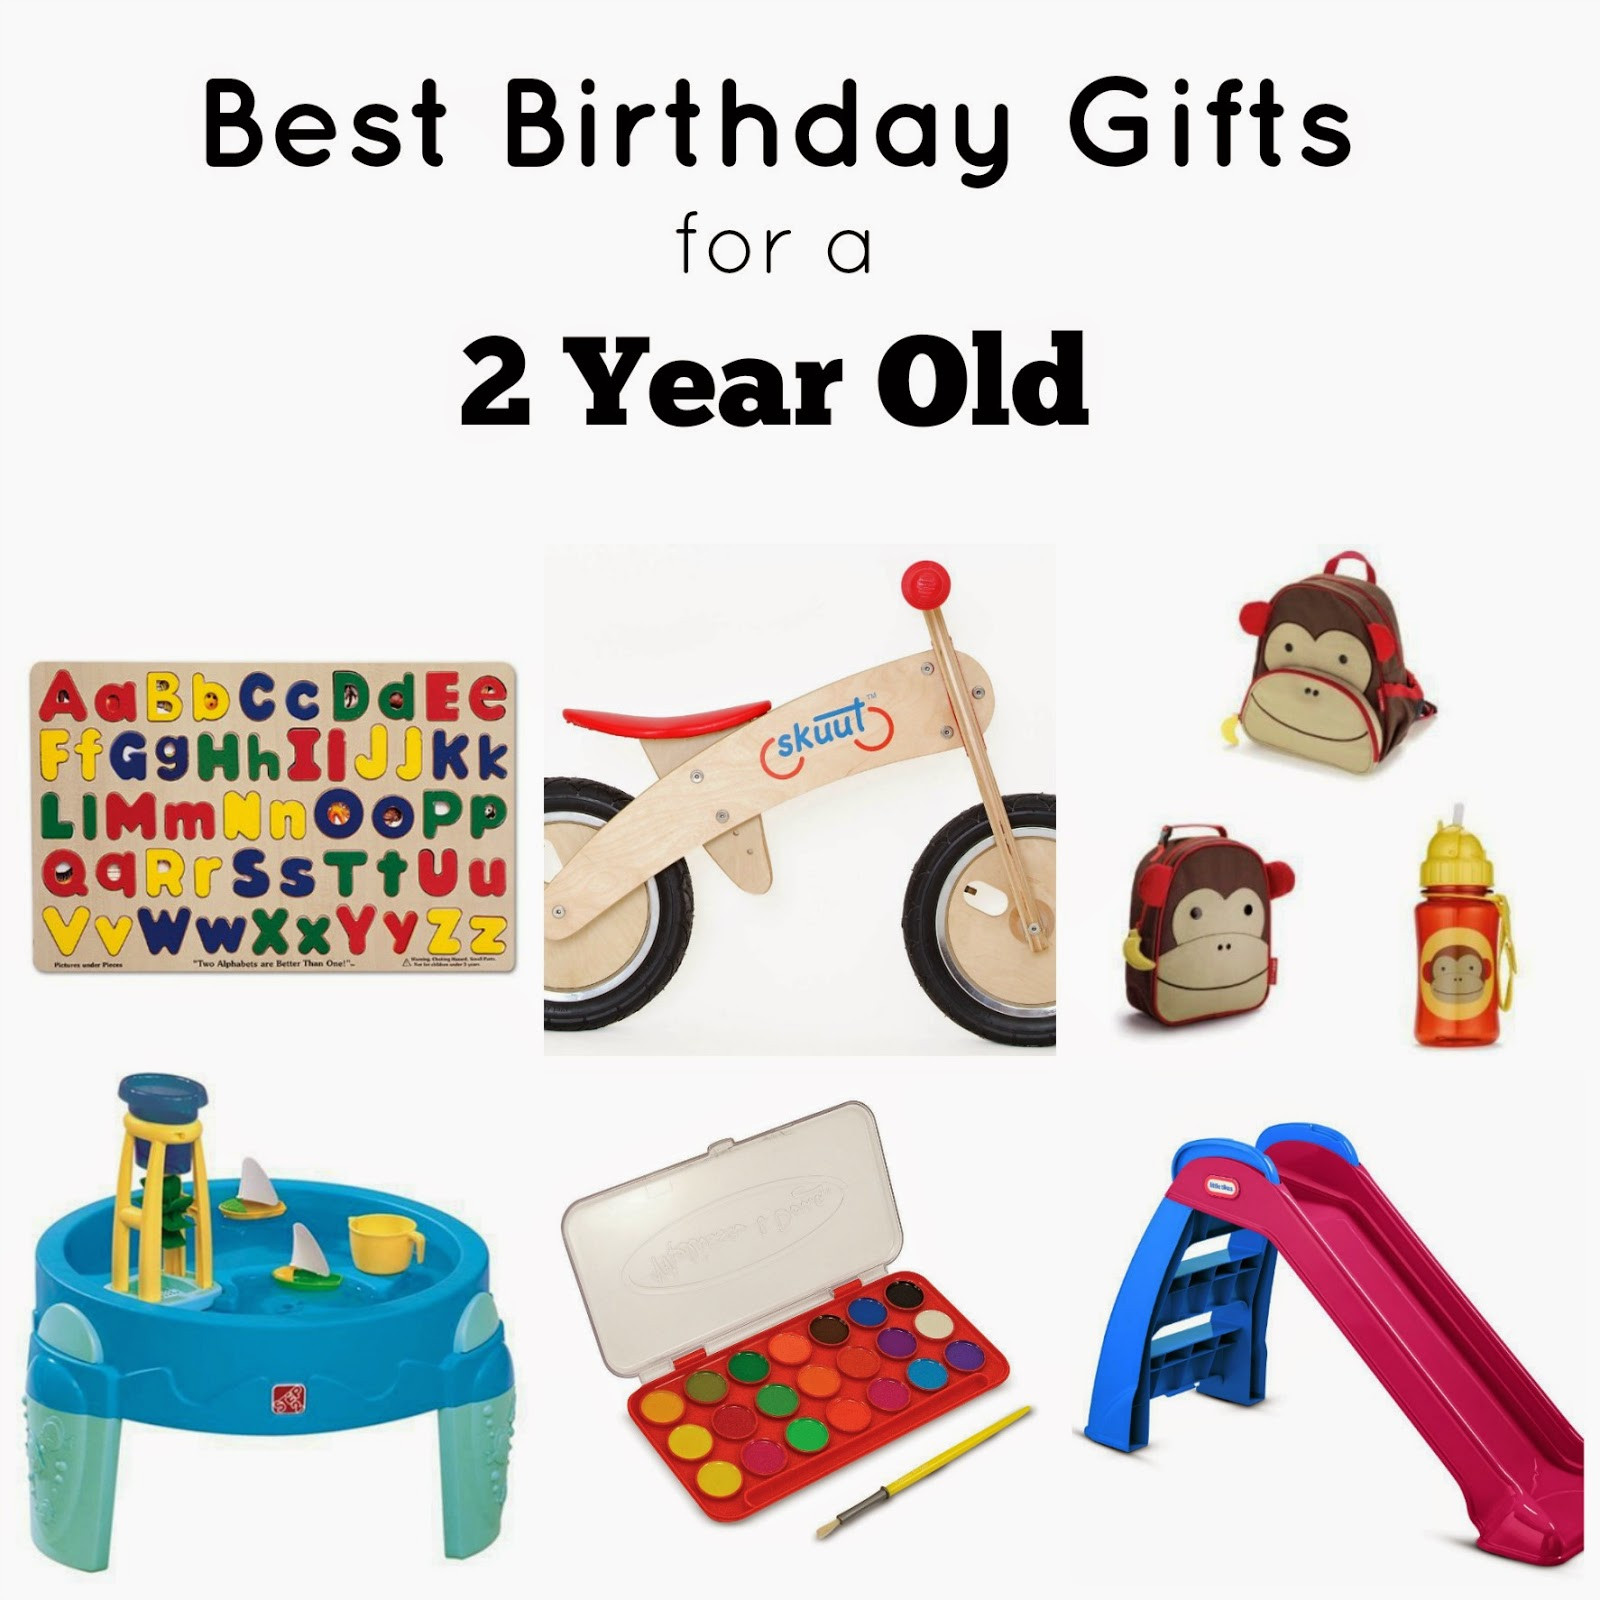 Best Gift Ideas For A 2 Year Old
 Our Life on a Bud Best Birthday Gifts for a 2 Year Old